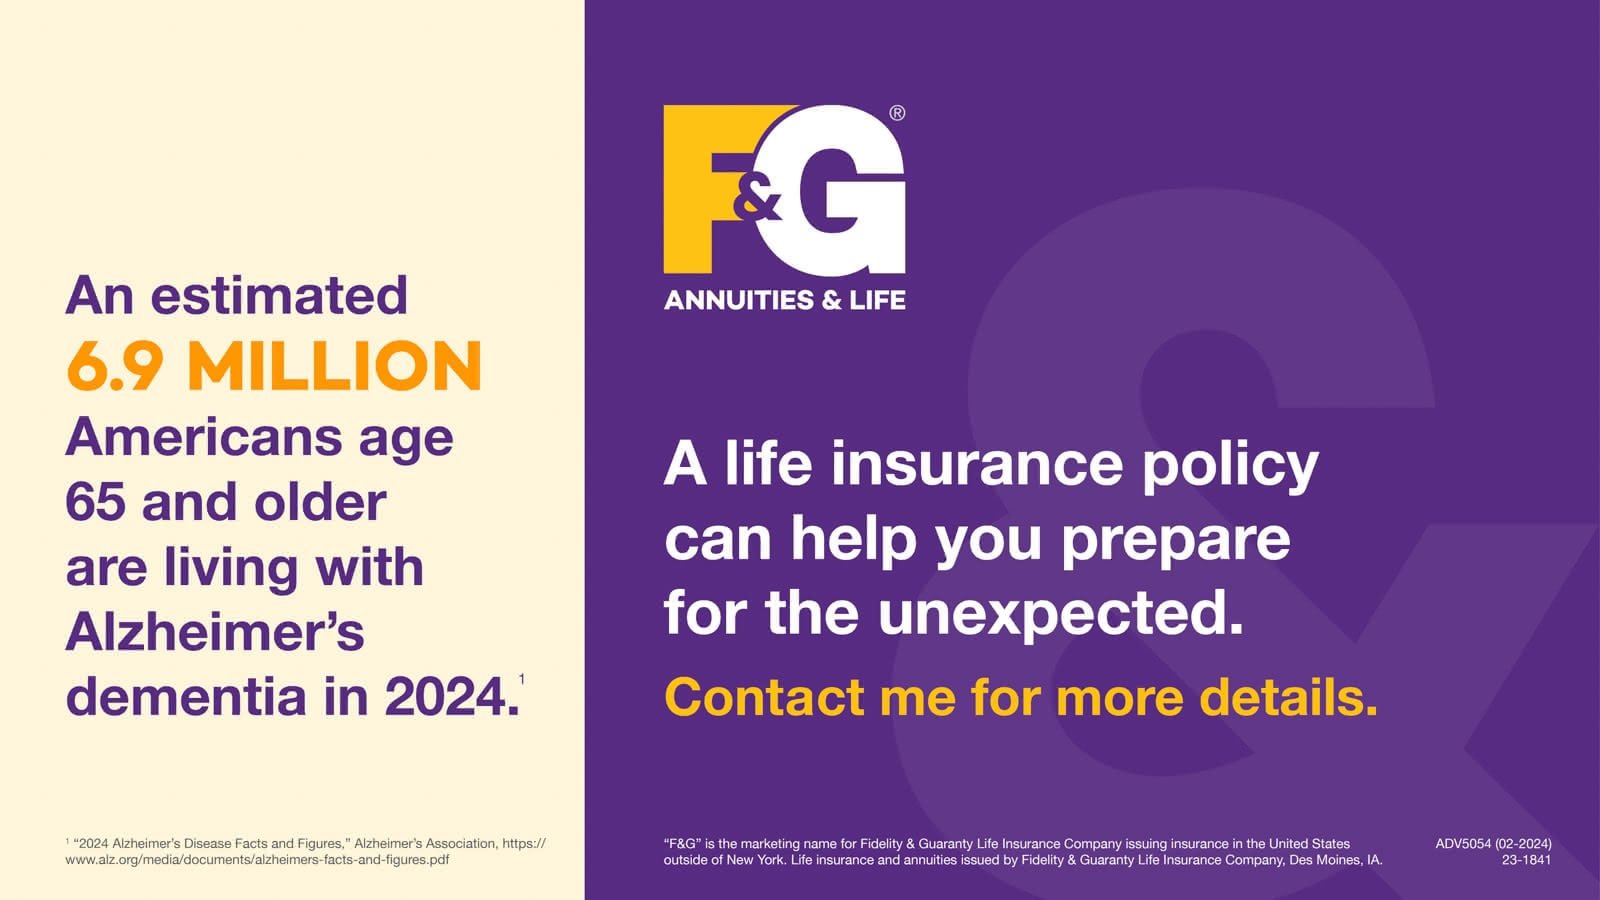 An estimated 6.9 million Americans age 65 and older are living with Alzheimer’s dementia in 2024.1A life insurance policy can help you prepare for the unexpected. Contact me for more details.